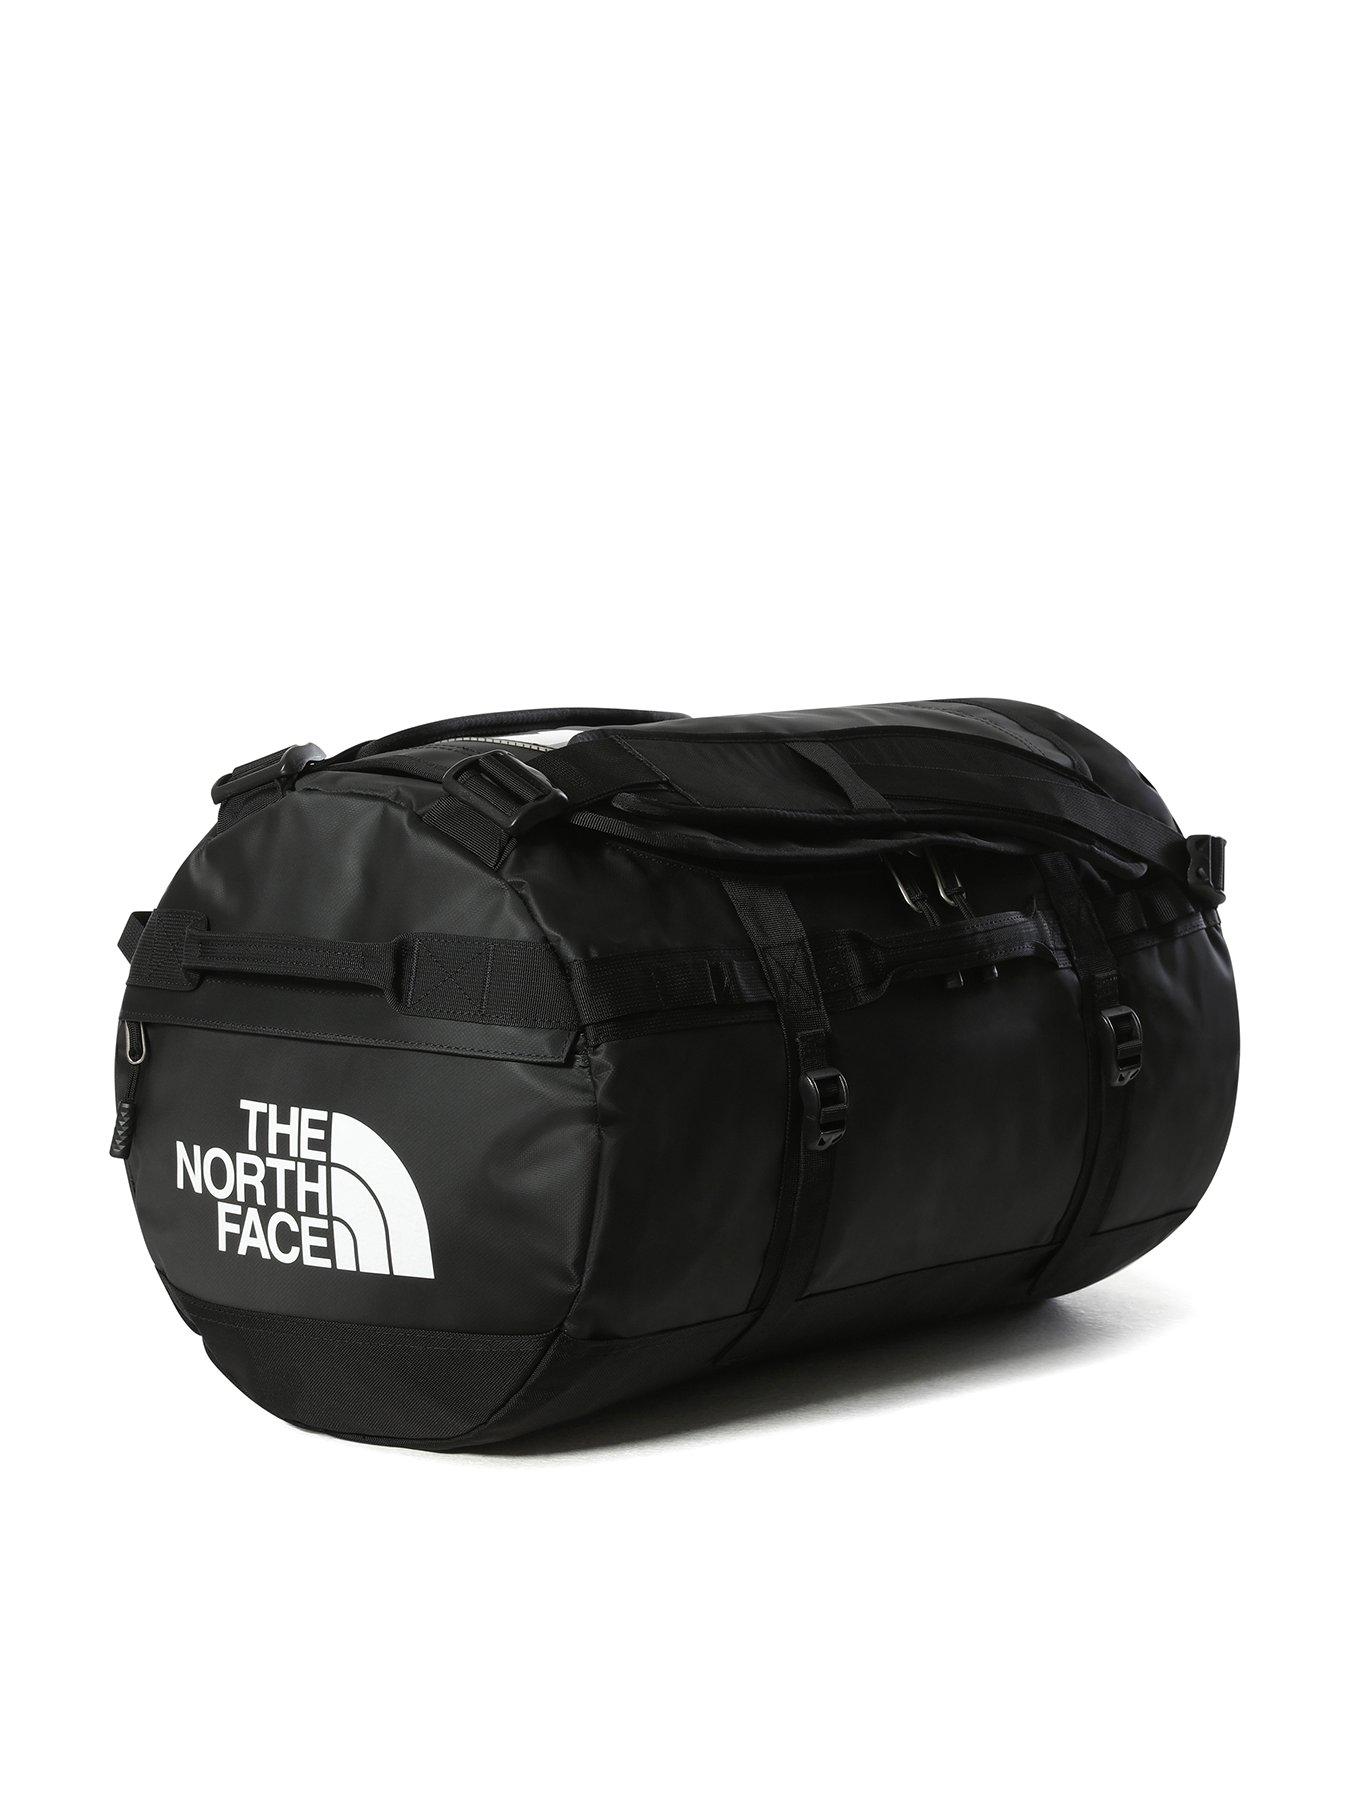 The North Face Small Base Camp Duffel Bag - Black